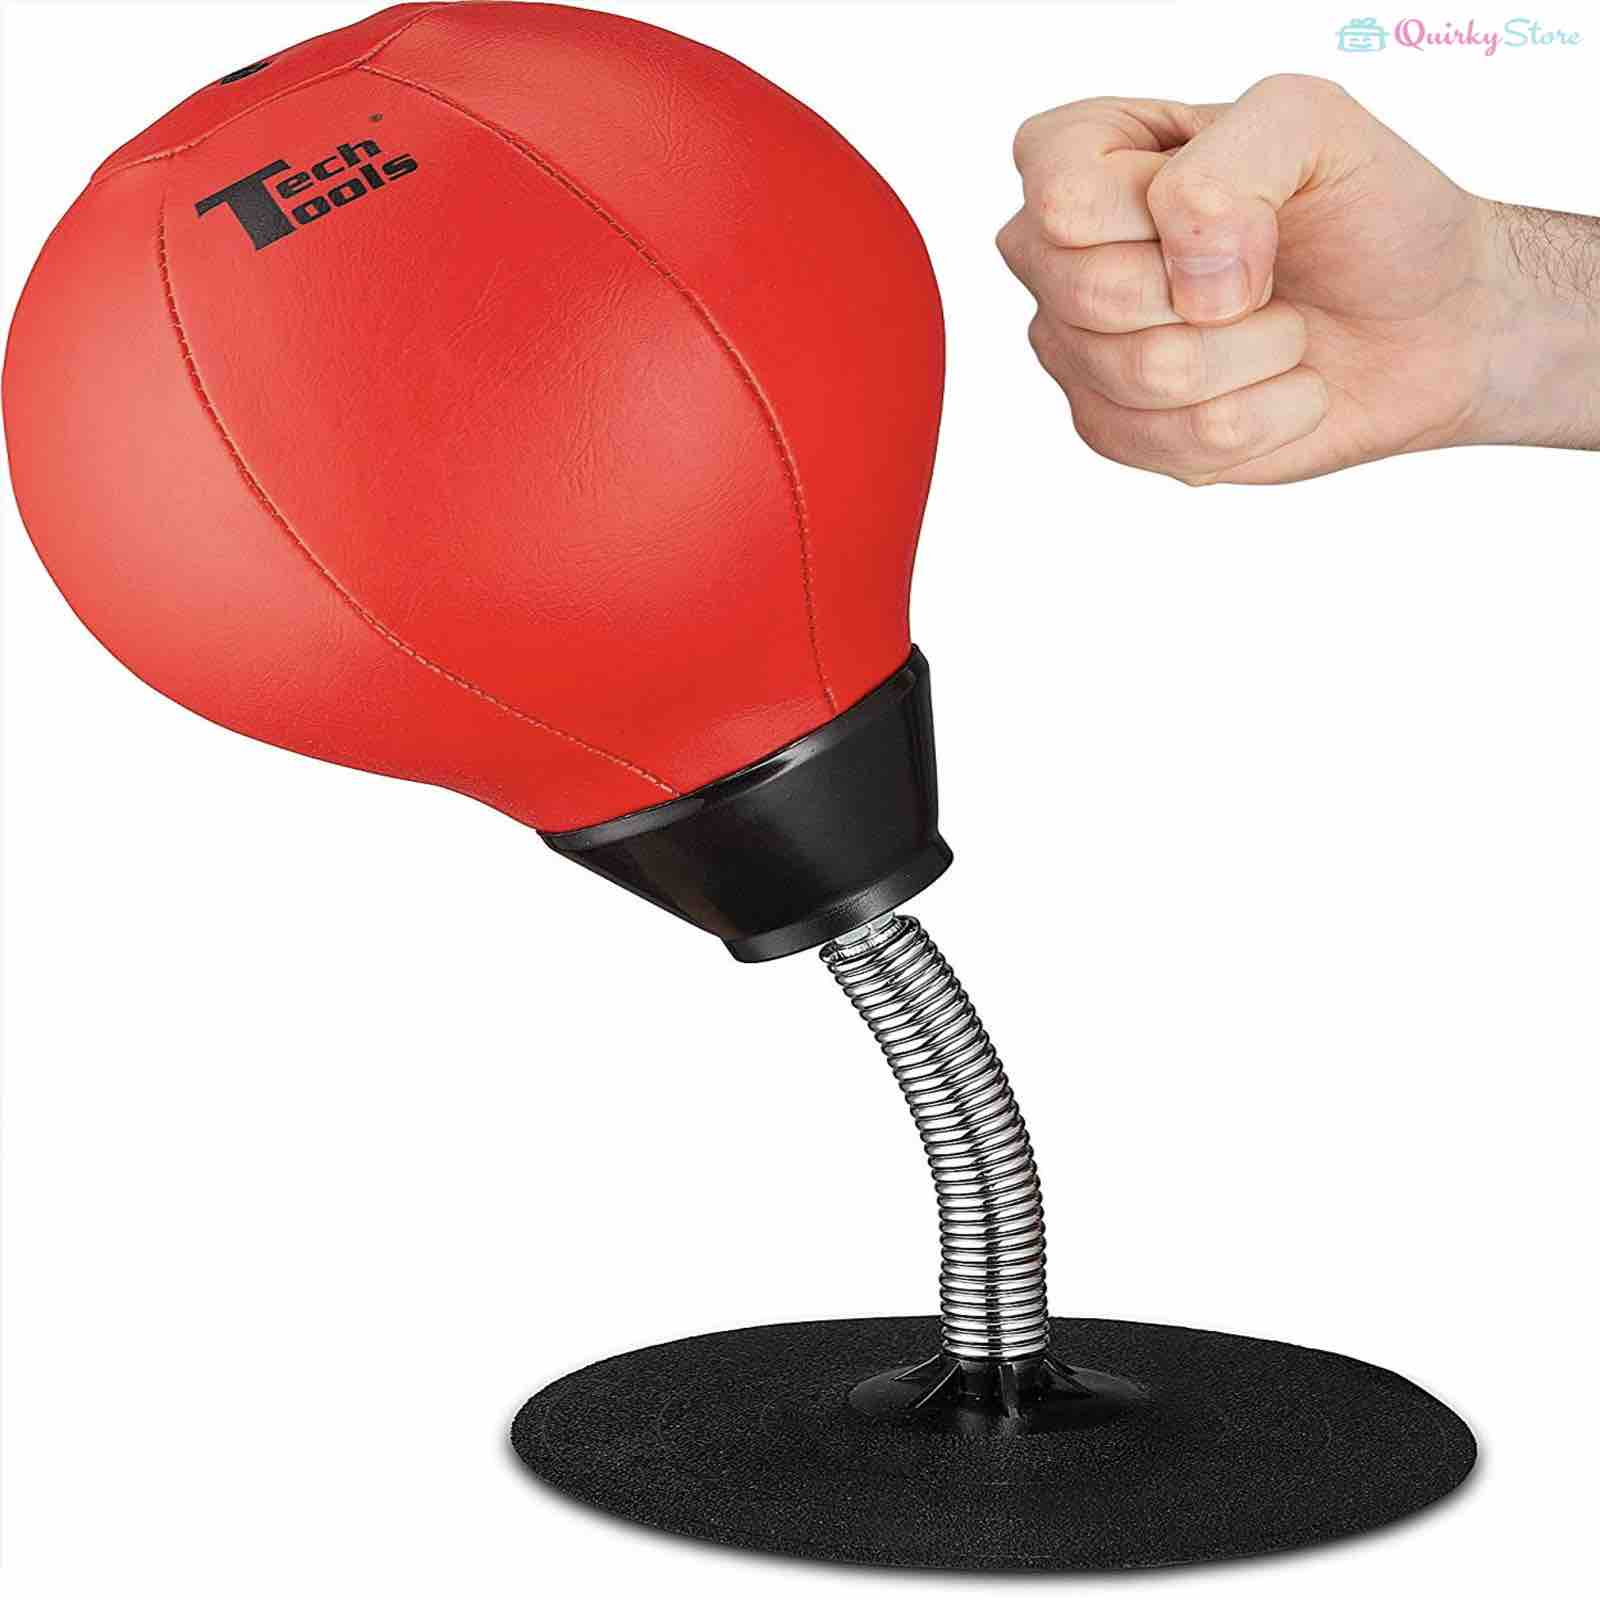 Stress Buster Desktop Punching Bag - Suctions to Your Desk, Heavy Duty Stress Relief Ball - QuirkyStore.in